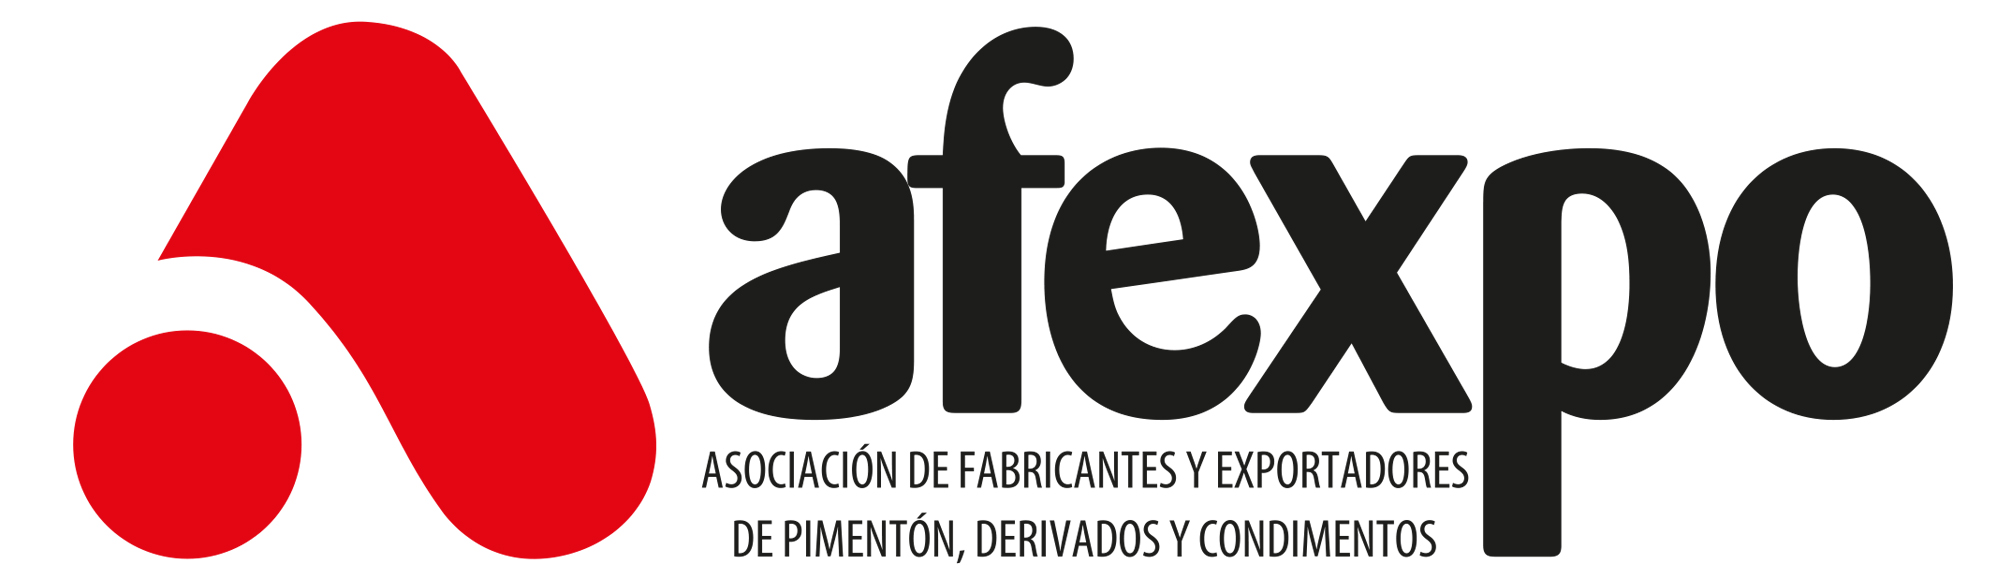 afexpo.org